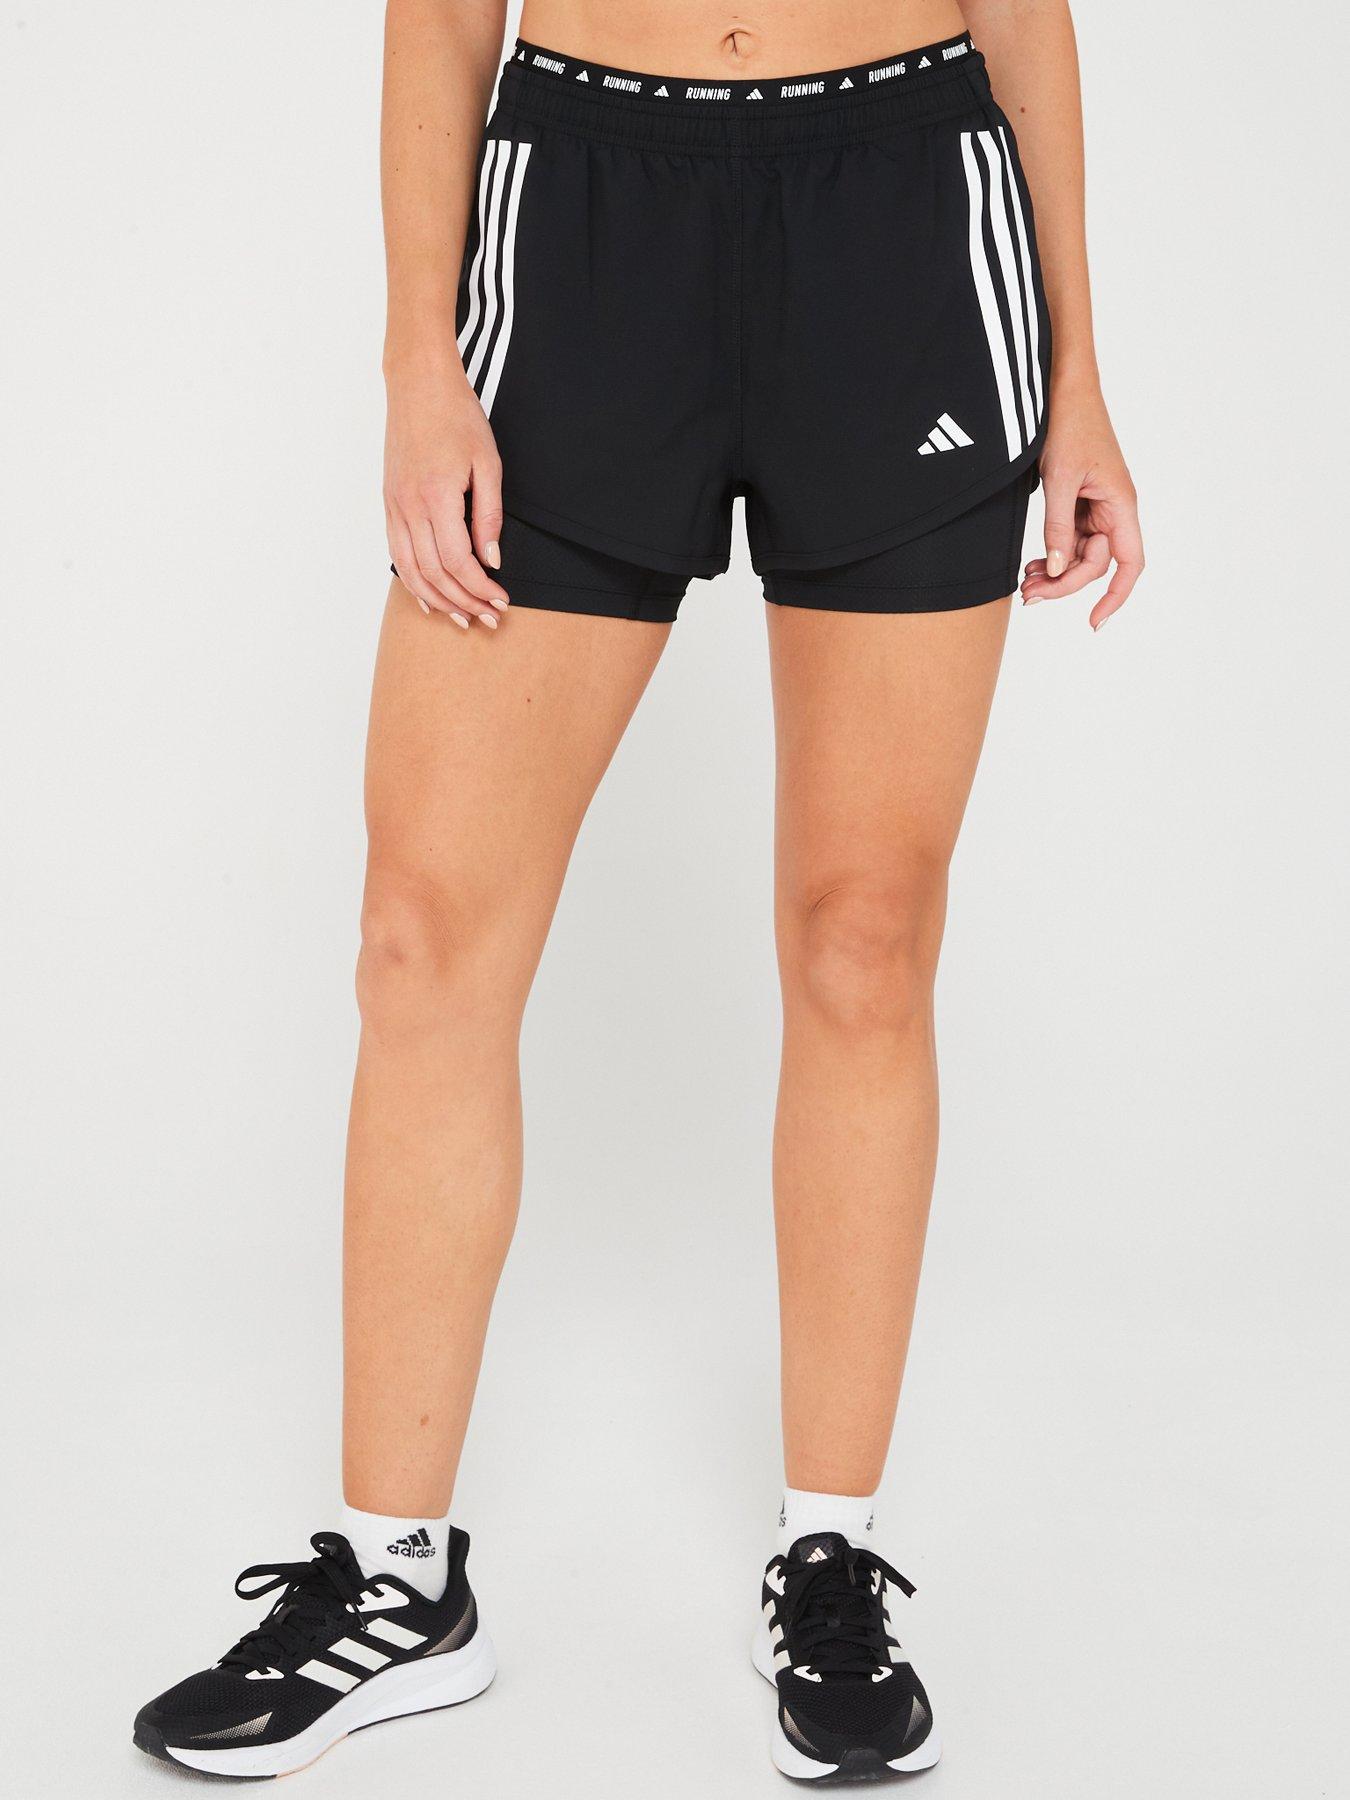 Buy Adidas Pacer 3-Stripes Woven Two-in-One Shorts black/white from £21.99  (Today) – Best Deals on